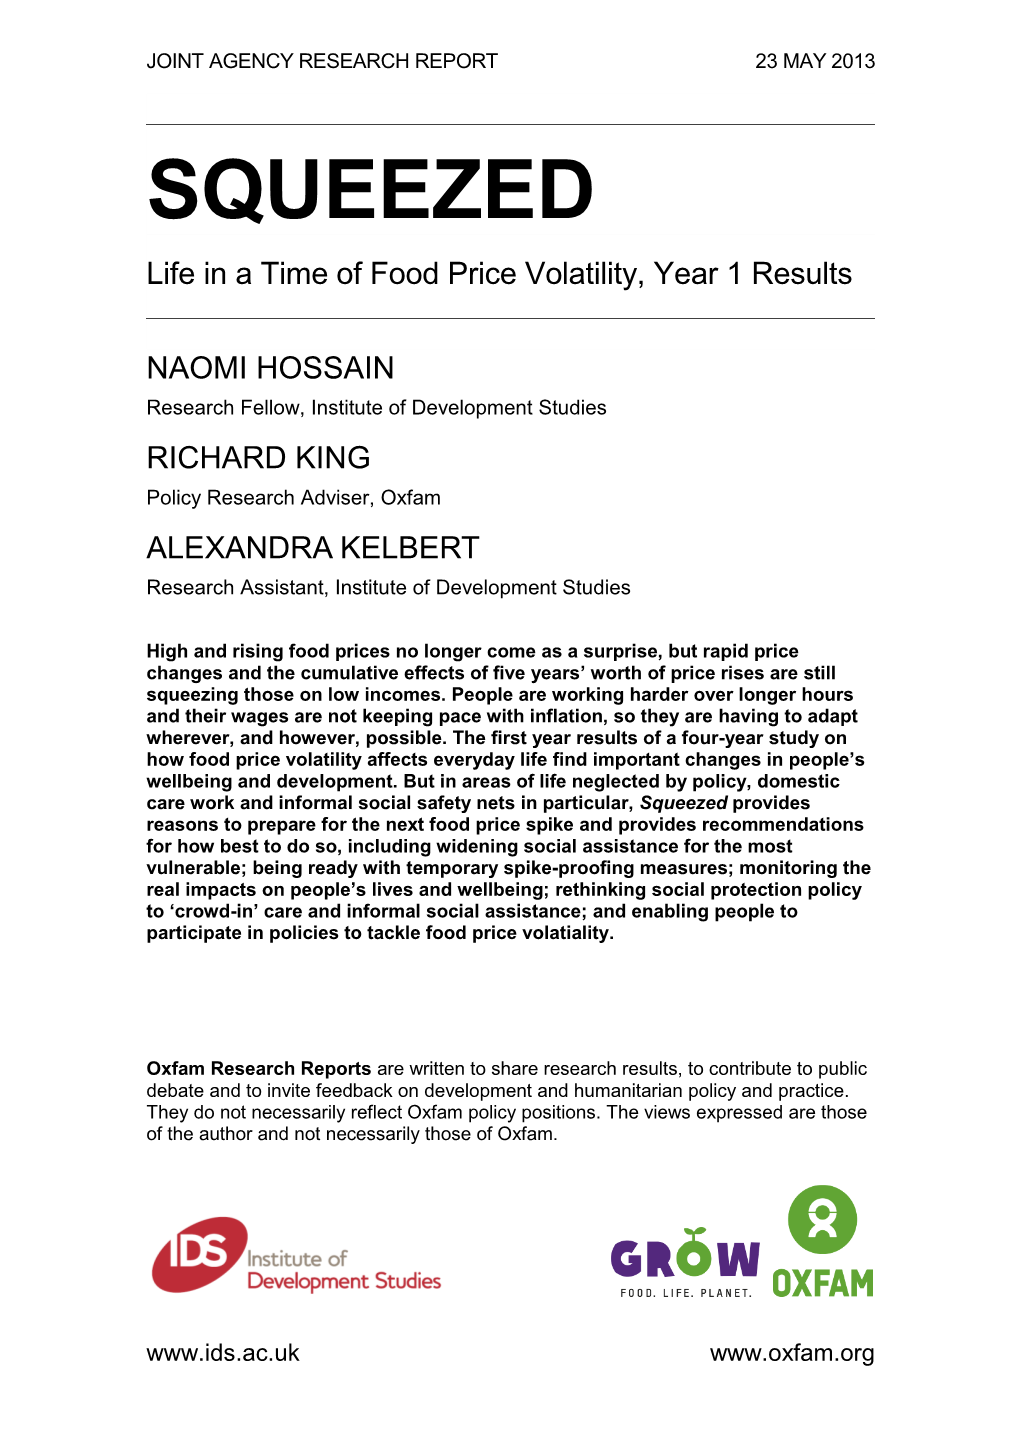 Life in a Time of Food Price Volatility, Year 1 Results